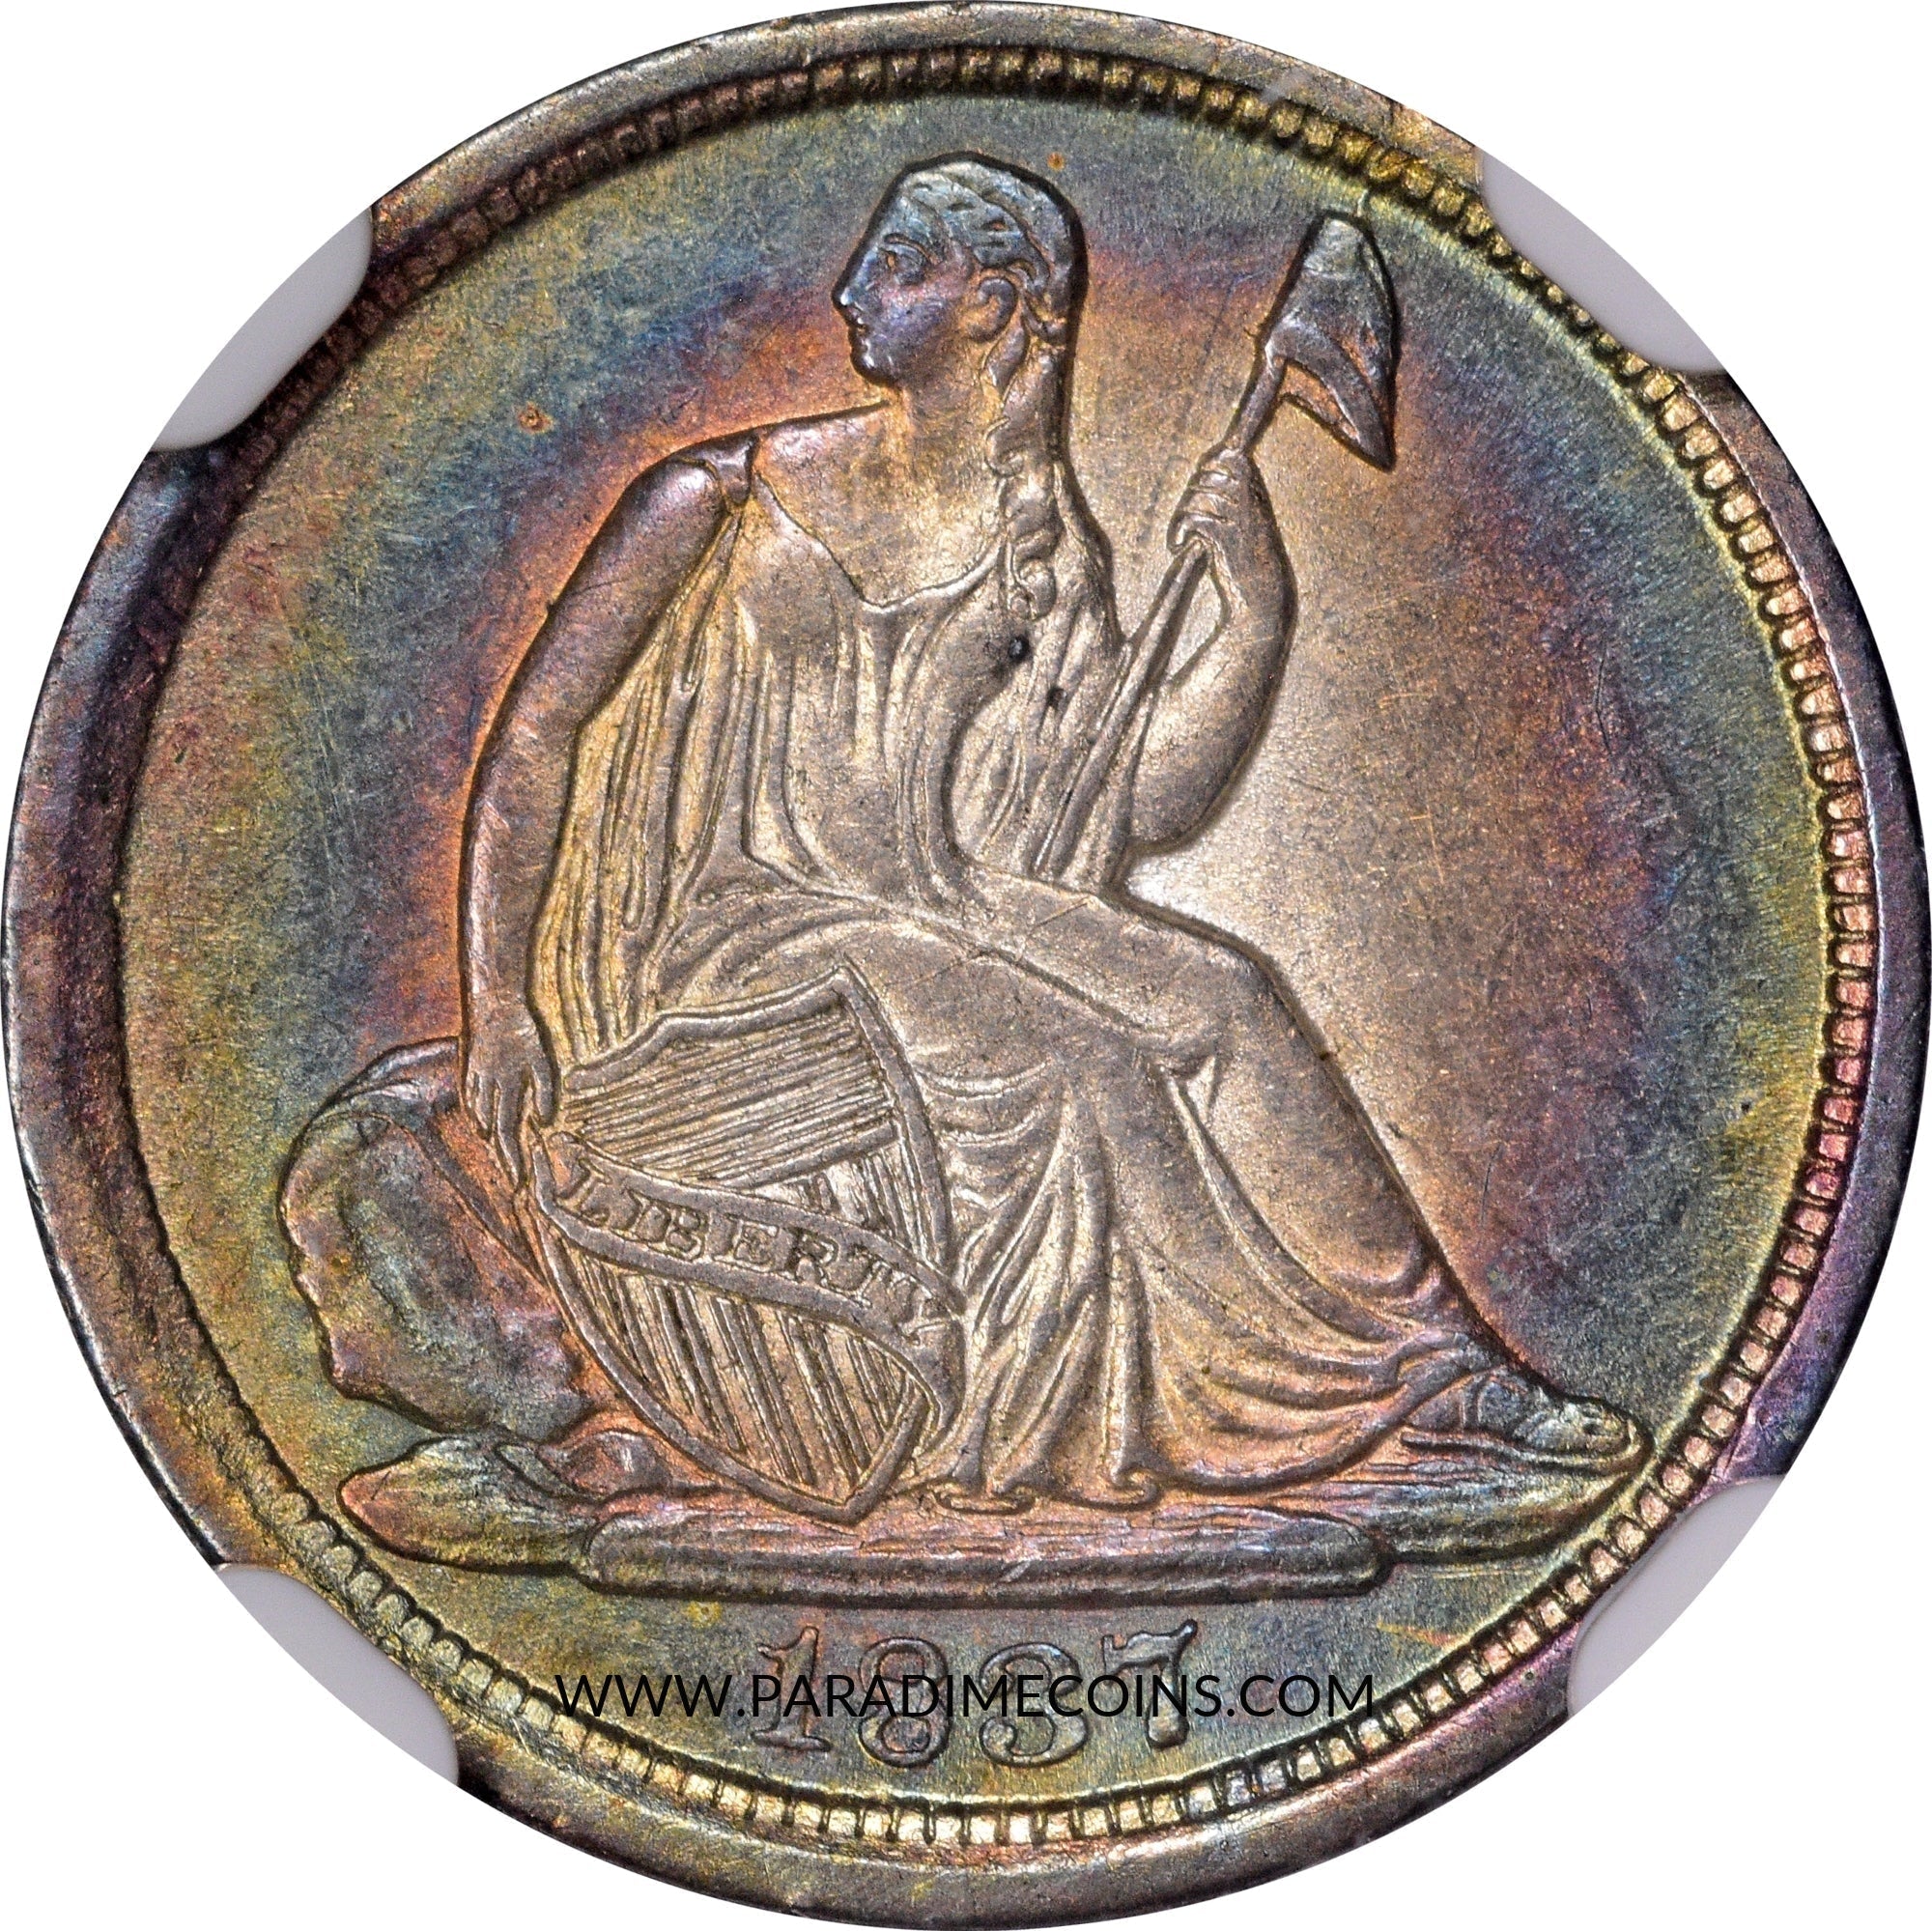 1837 H10C SEATED NO STARS LG DT MS61 NGC - Paradime Coins | PCGS NGC CACG CAC Rare US Numismatic Coins For Sale